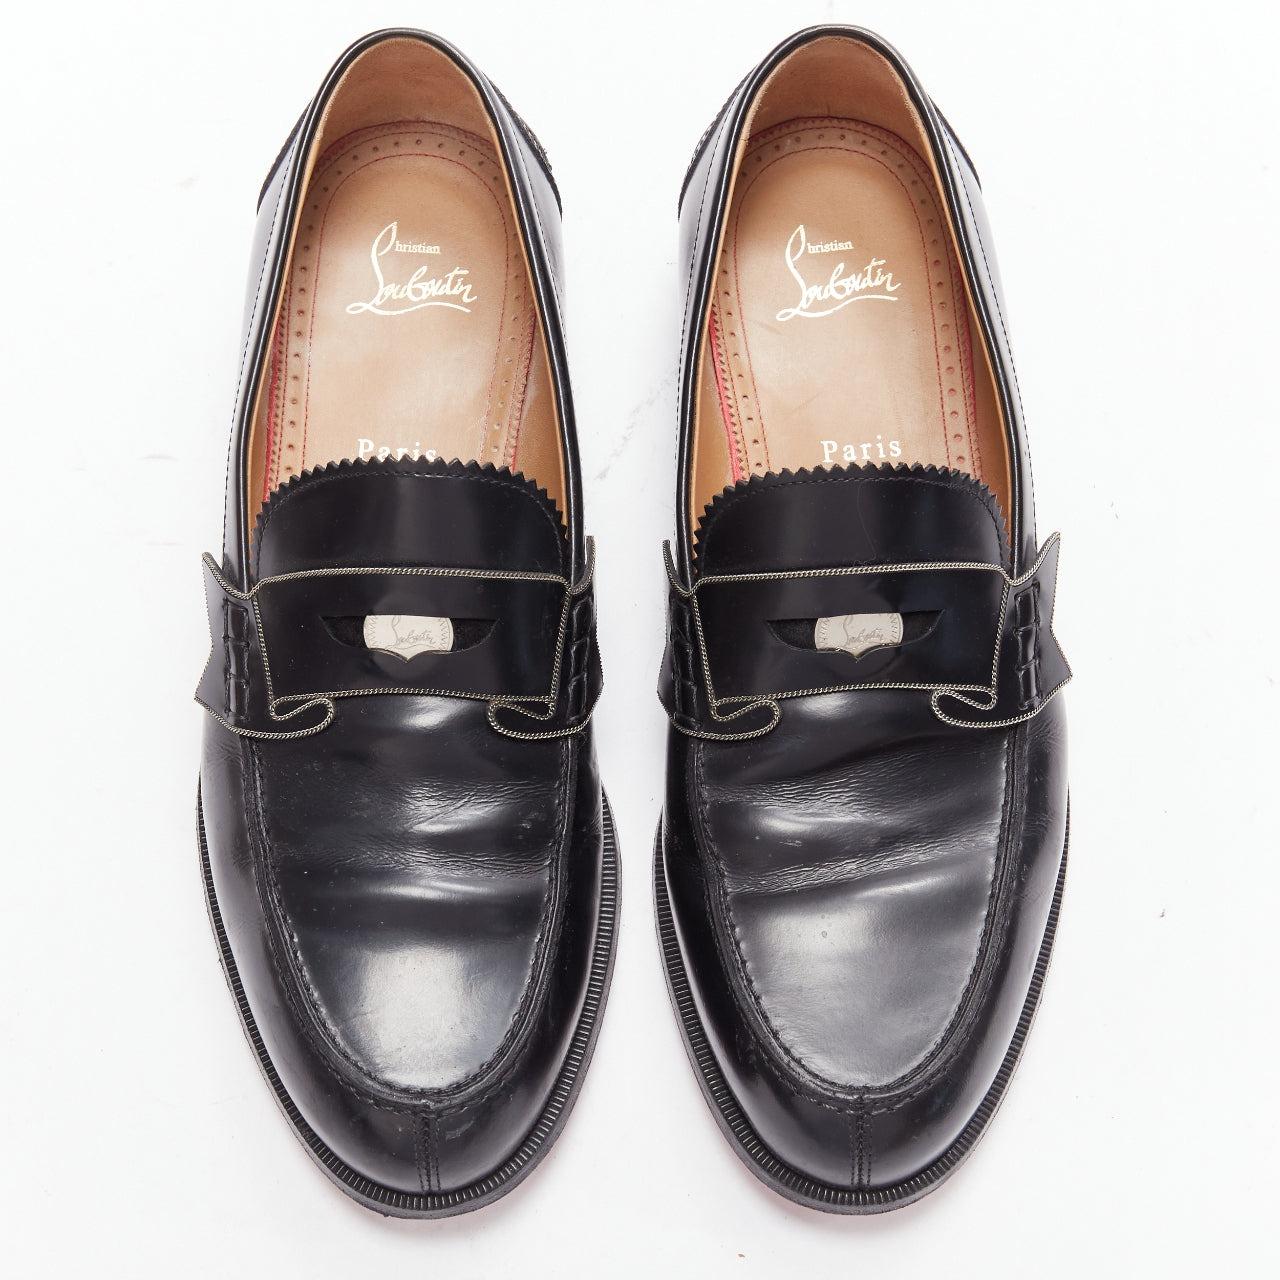 CHRISTIAN LOUBOUTIN Monono black silver logo penny leather loafers EU42
Reference: JSLE/A00083
Brand: Christian Louboutin
Model: Monono
Material: Leather, Metal
Color: Black, Silver
Pattern: Solid
Closure: Slip On
Lining: Nude Leather
Made in: